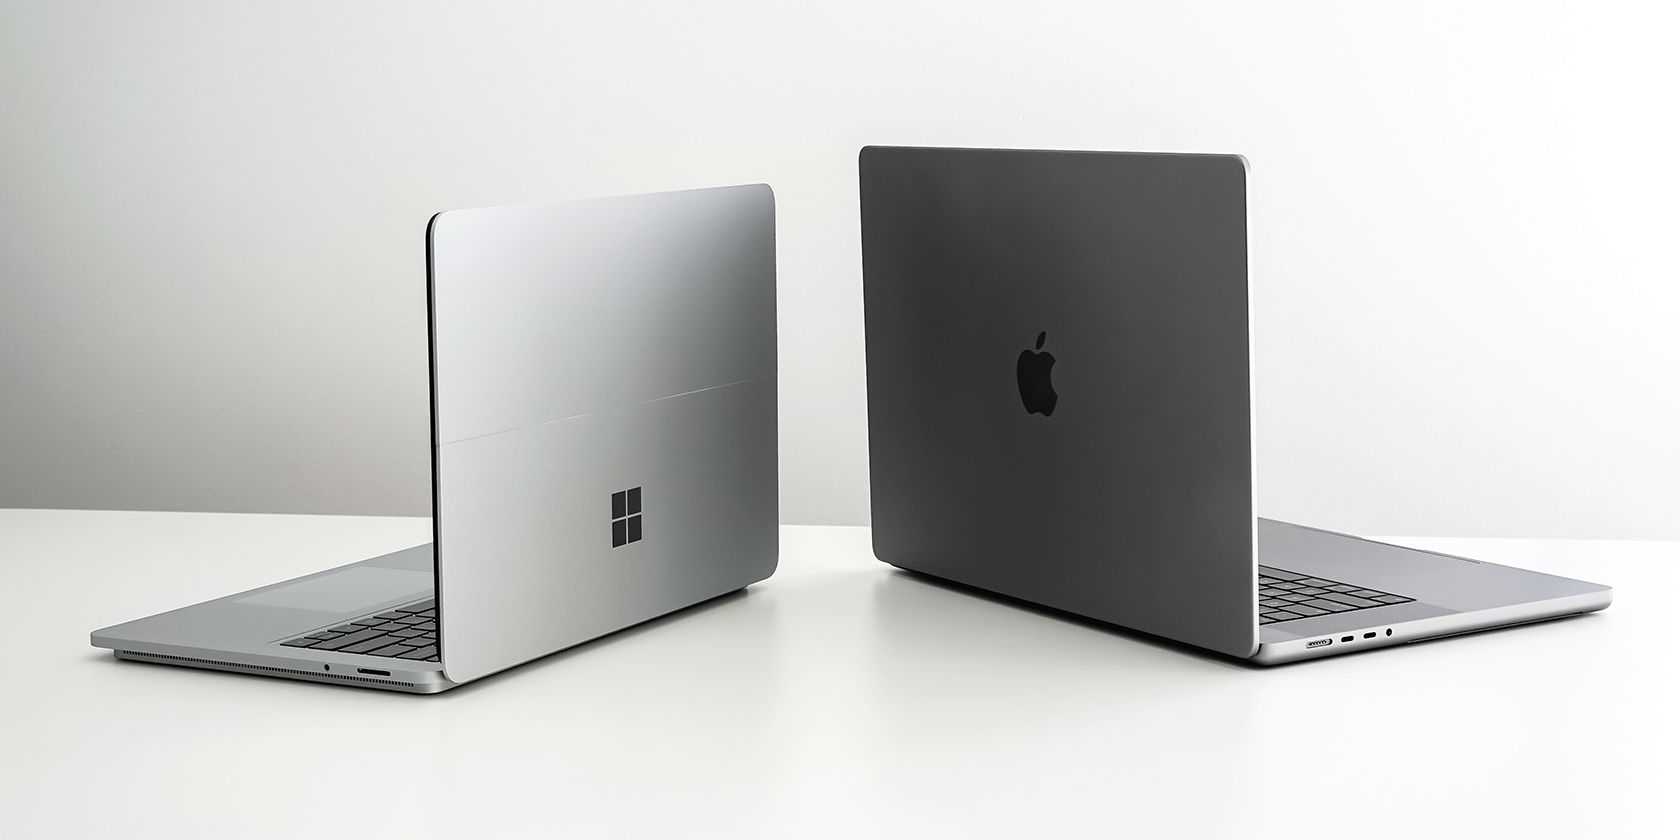 A Mac and a Windows Laptop Placed Side-by-Side on a White Surface